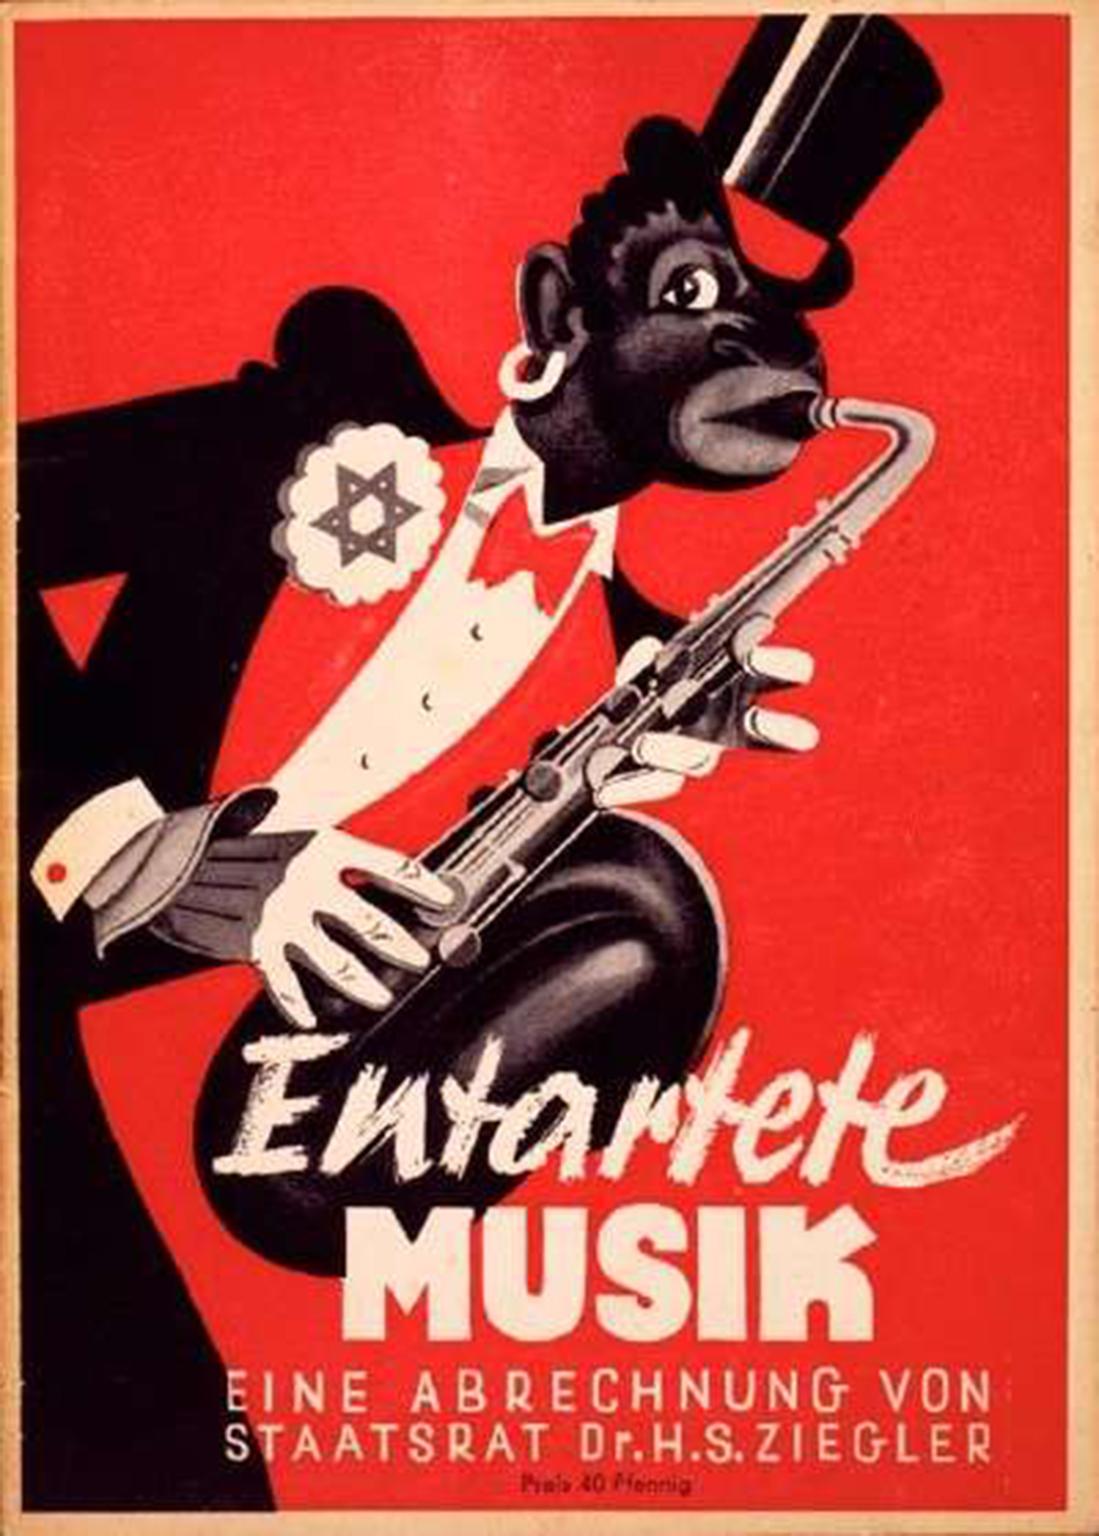 A poster for the Third Reich’s 1938 exhibition of ‘Degenerate Music’ in Düsseldorf